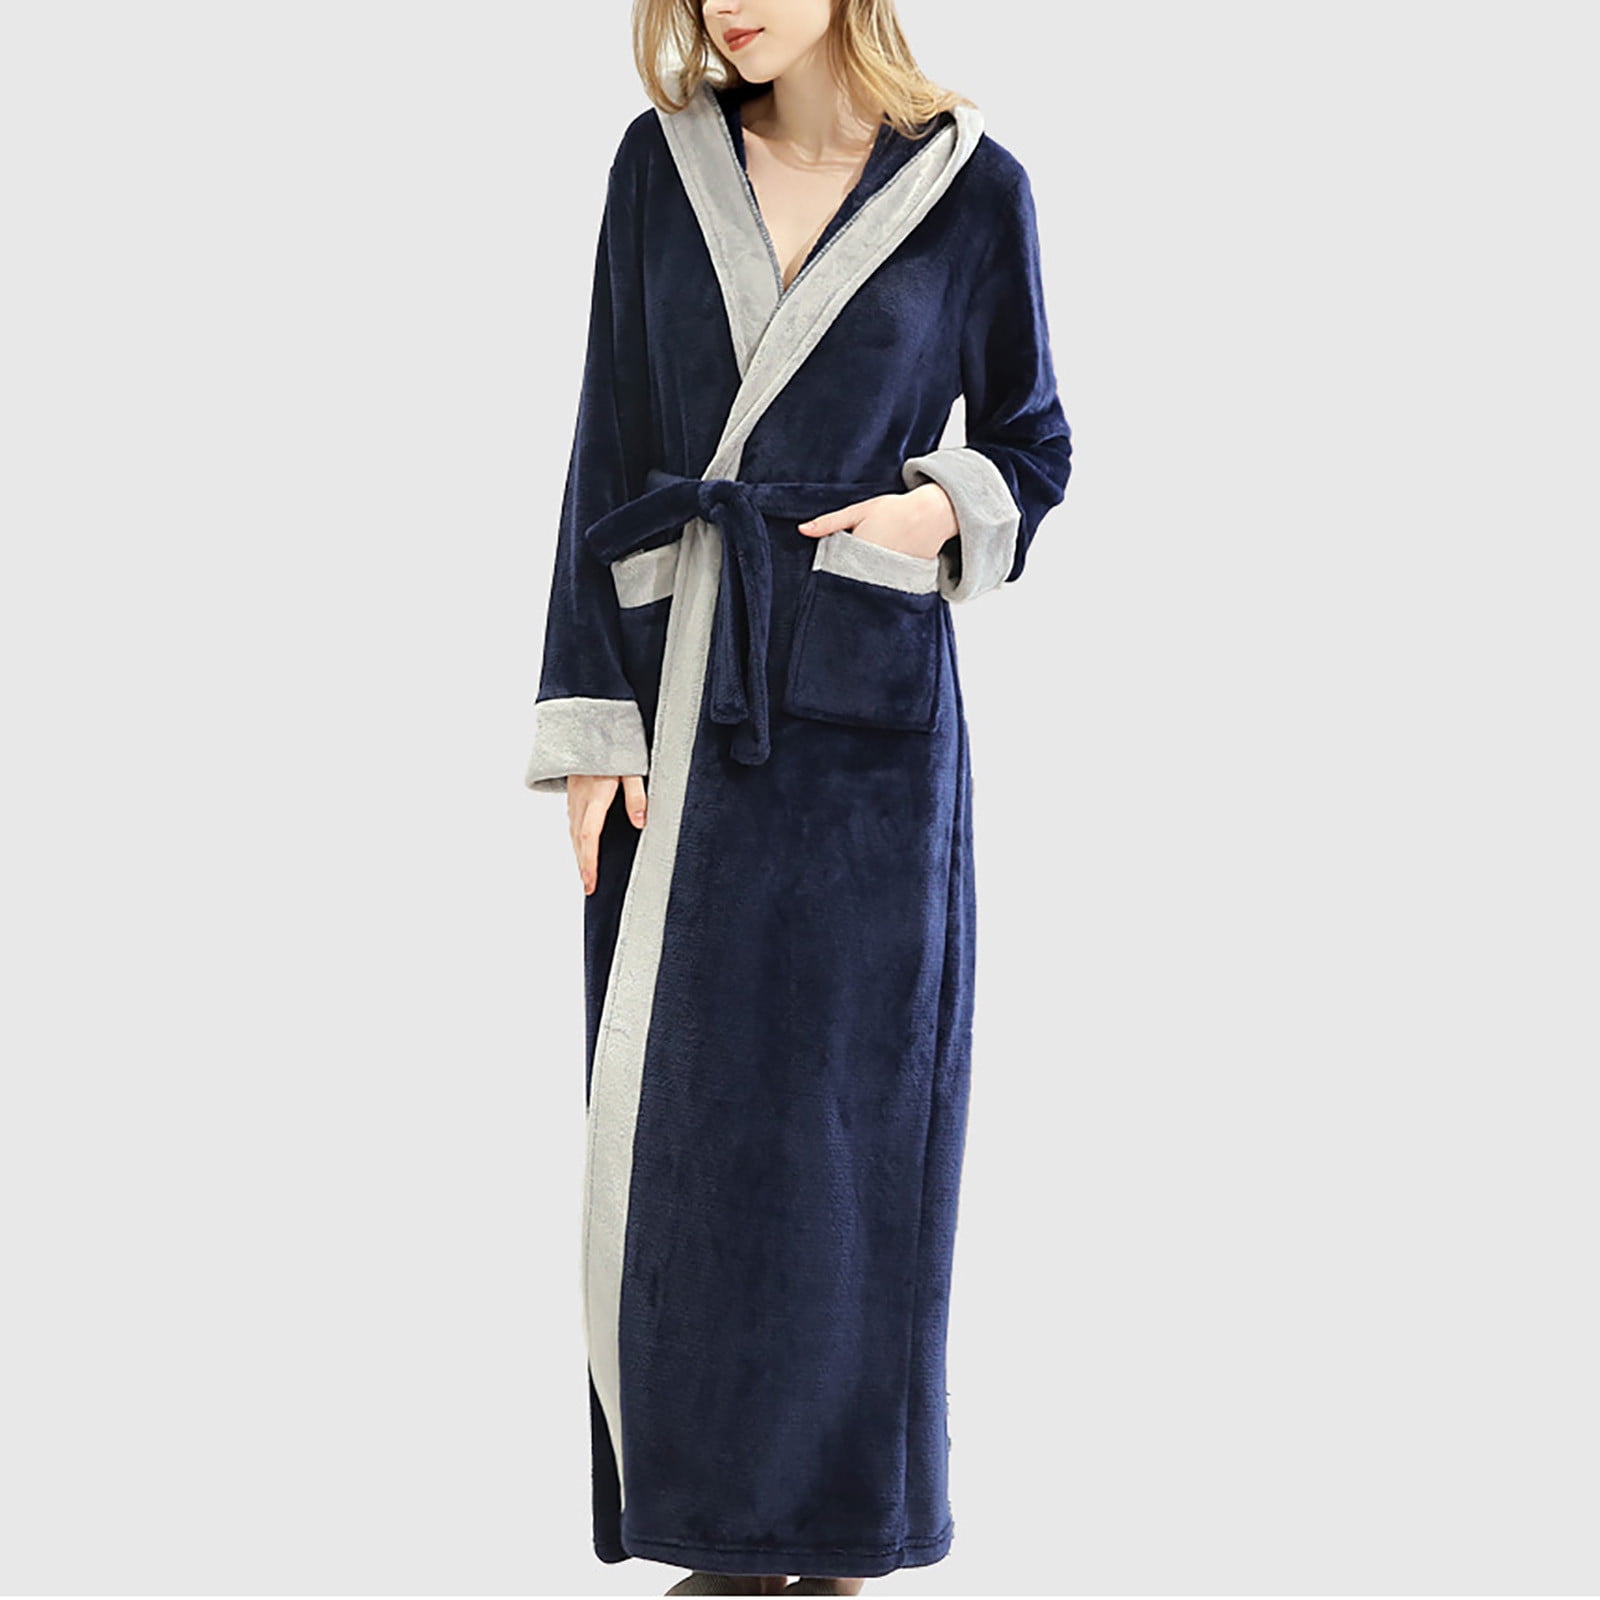 Designer Robes & Dressing Gowns for Women | FARFETCH